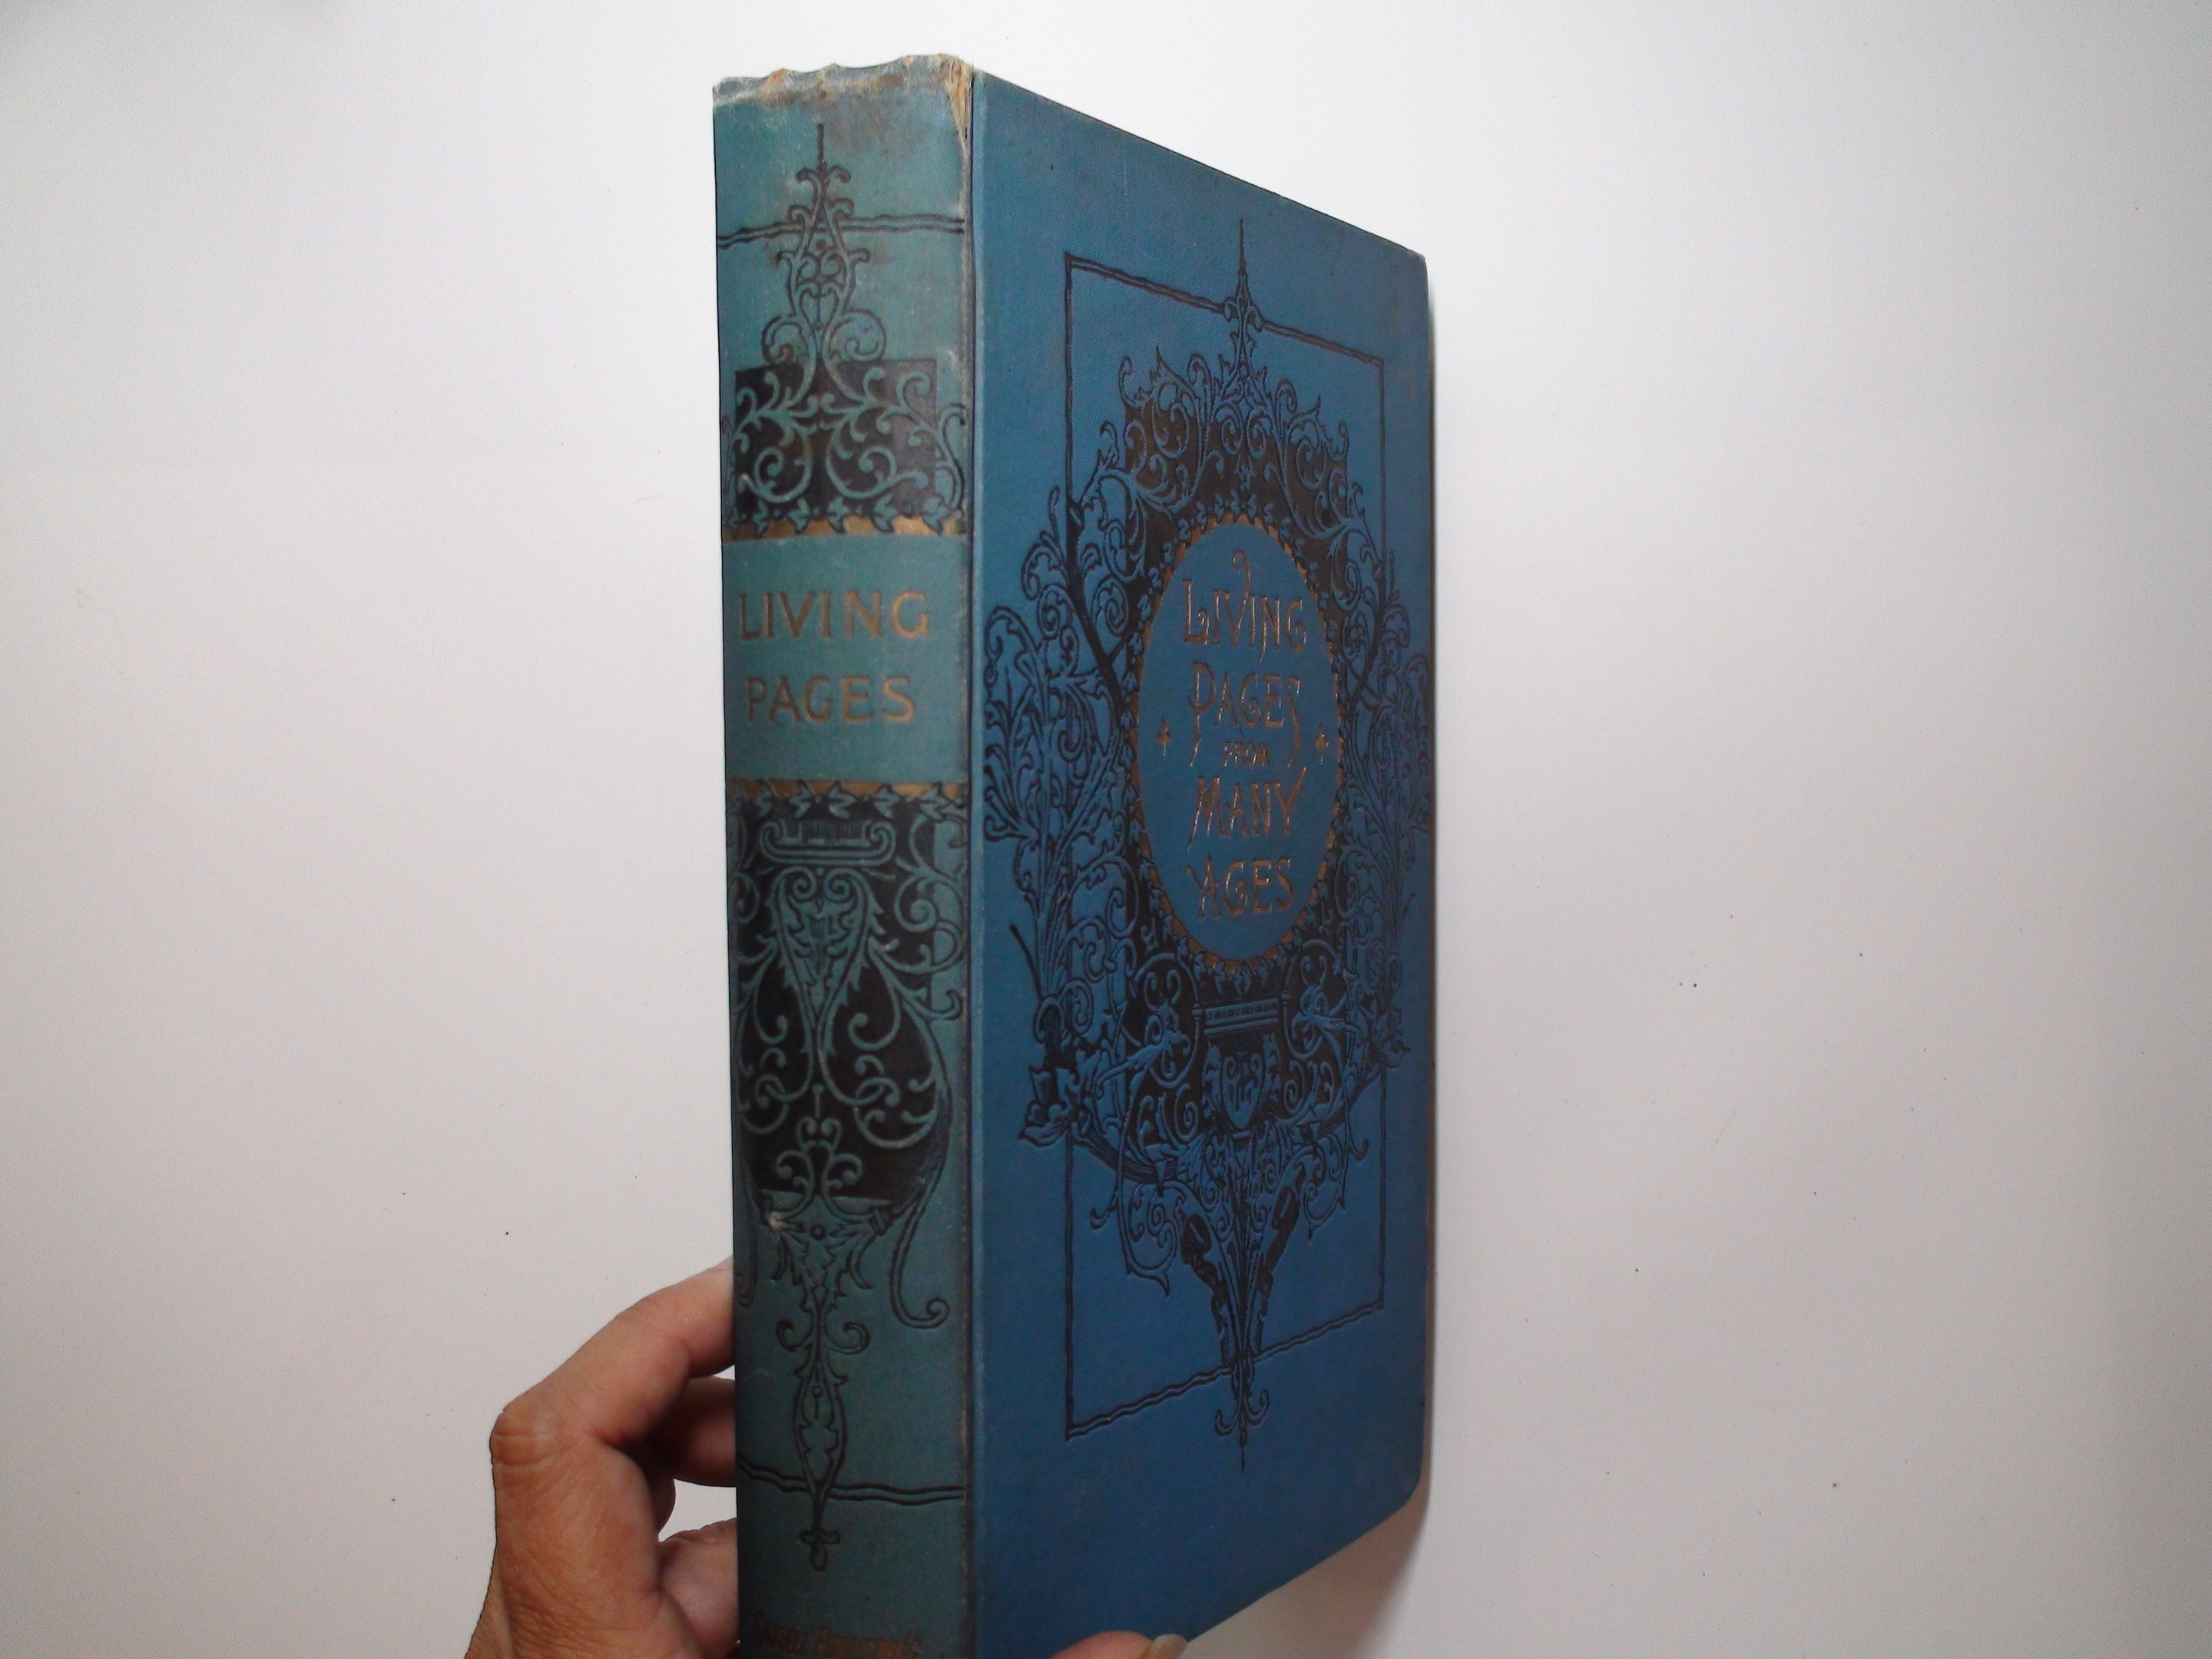 Living Pages from Many Ages, Mary Hield, Illustrated, Victorian Binding, c1890s